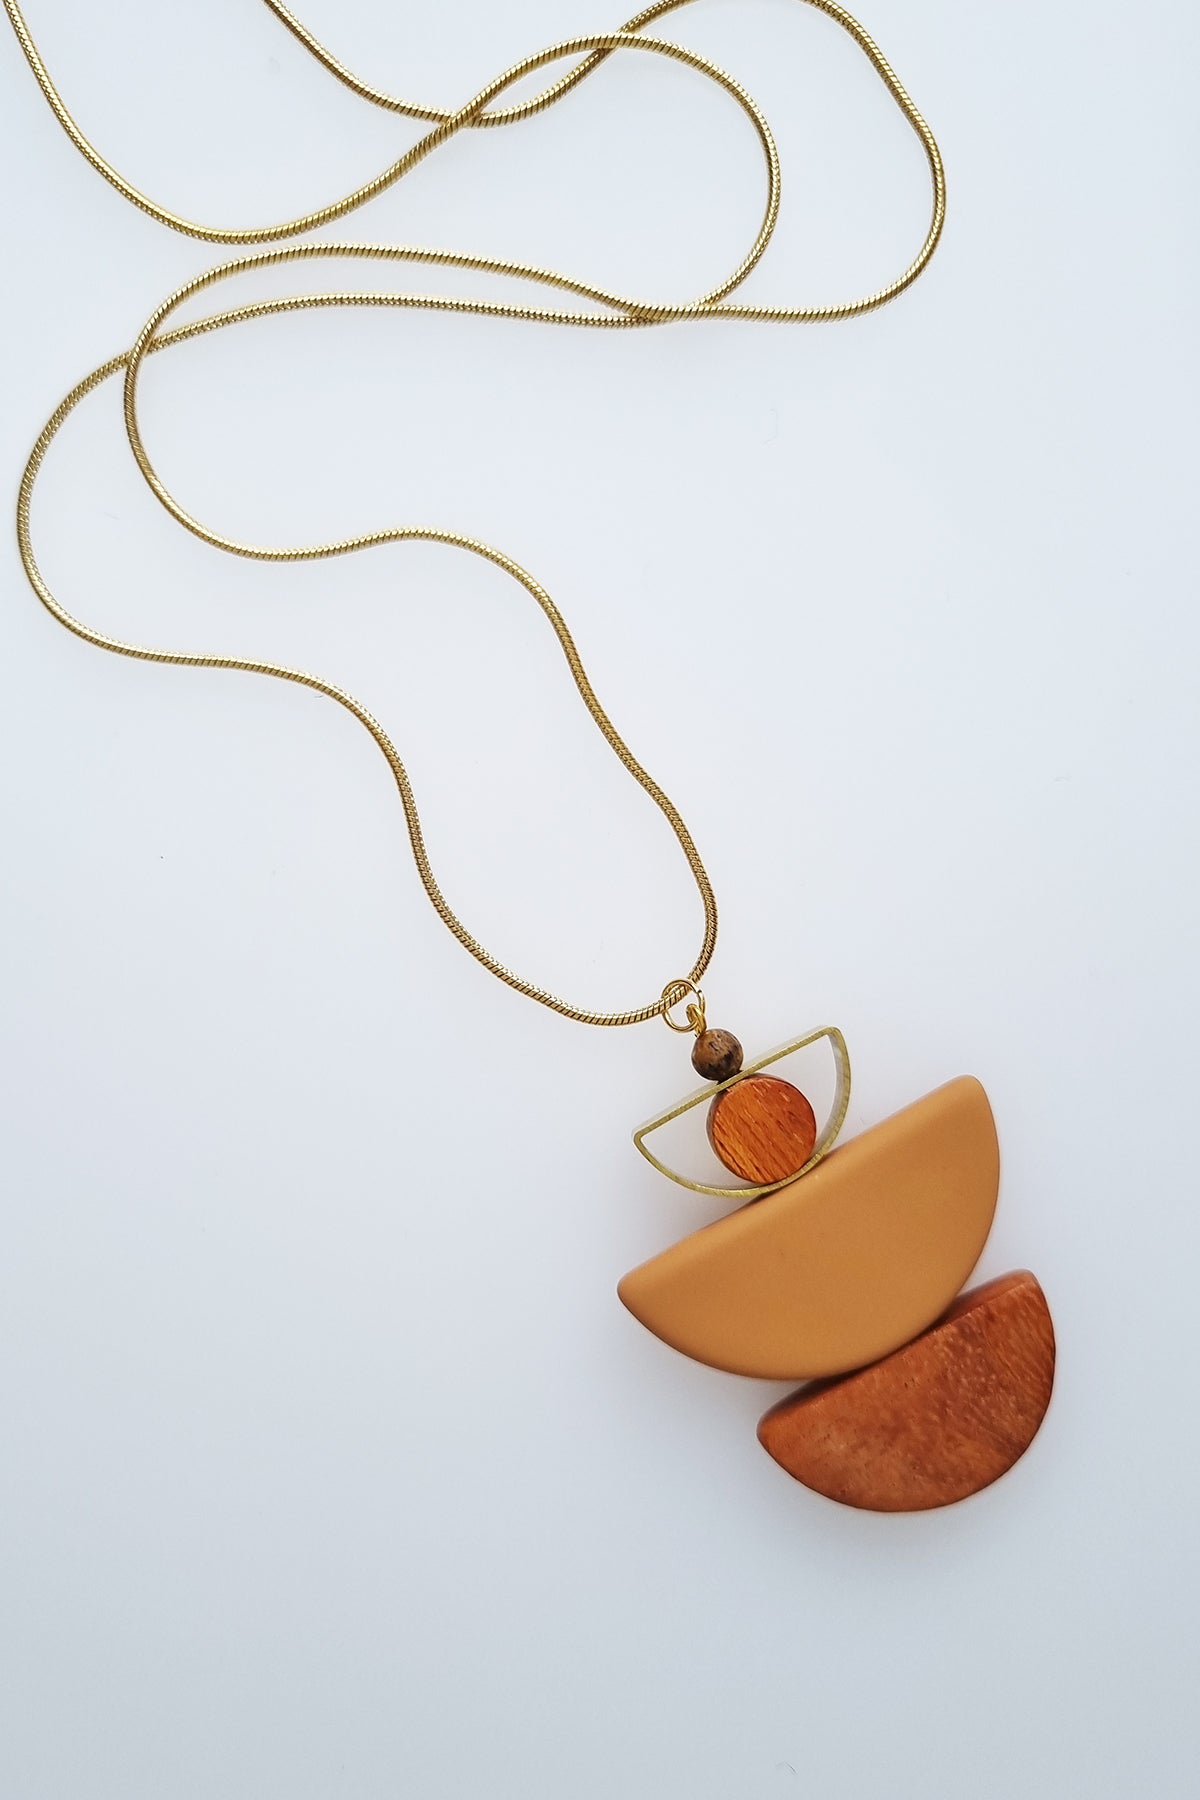 A necklace with a gold chain sits against a white background. It features a small wooden bead, followed by a brass D shape with a wooden circle bead enclosed, followed by a mustard D shaped bead, and a wooden D shape bead.